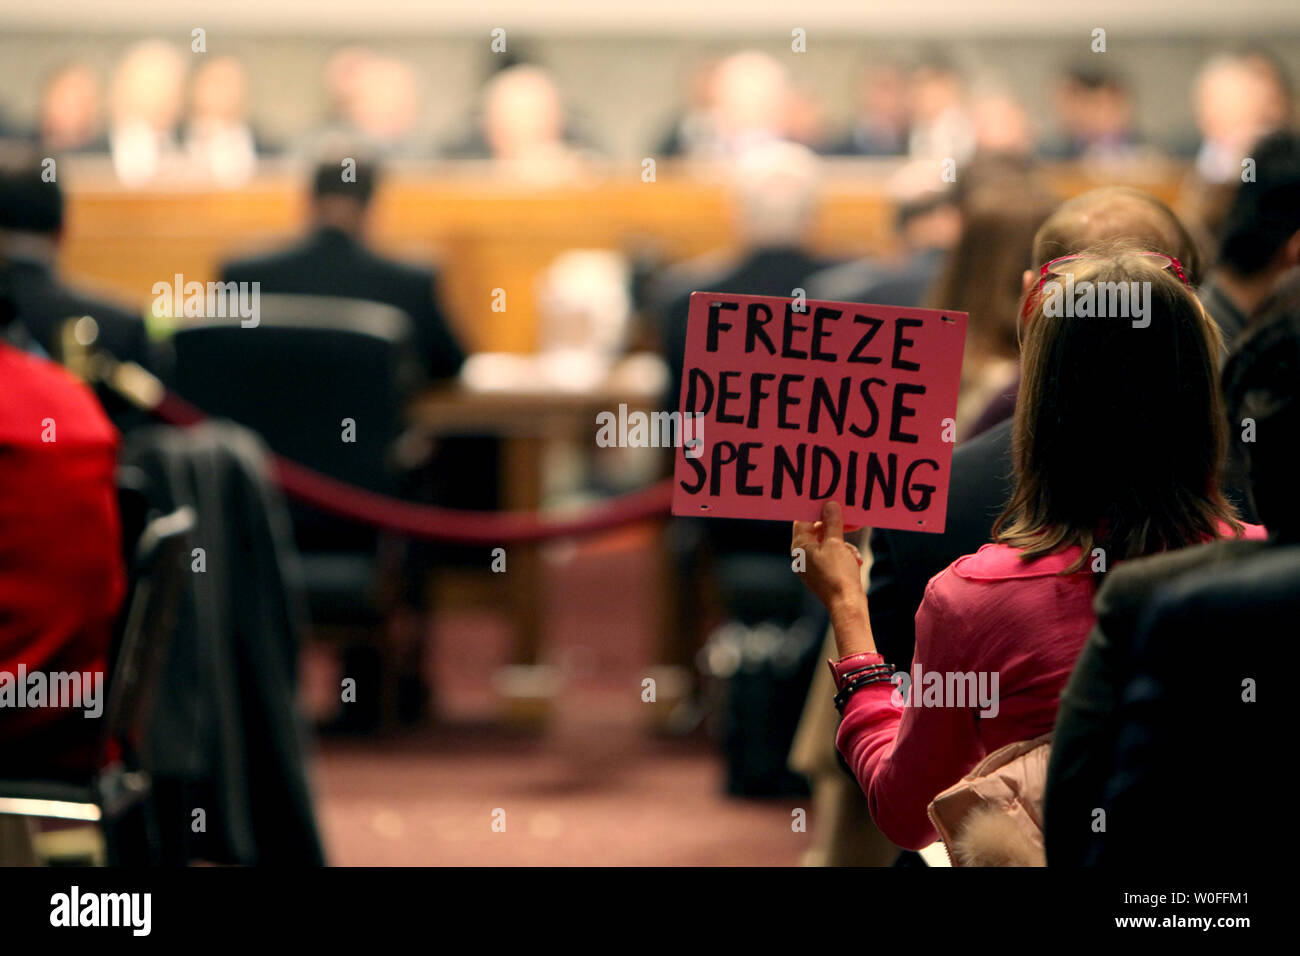 A Code Pink protester holds a sign saying 'Freeze Defense Spending' during a full Senate Armed Services Committee hearing on the Defense Authorization Request for FY2011 and the 'Don't Ask, Don't Tell' policy on Capitol Hill in Washington February 2, 2010. Secretary of Defense Robert Gates and Chairman of the Joint Chiefs of Staff Adm. Michael Mullen testify.        UPI/Madeline Marshall Stock Photo